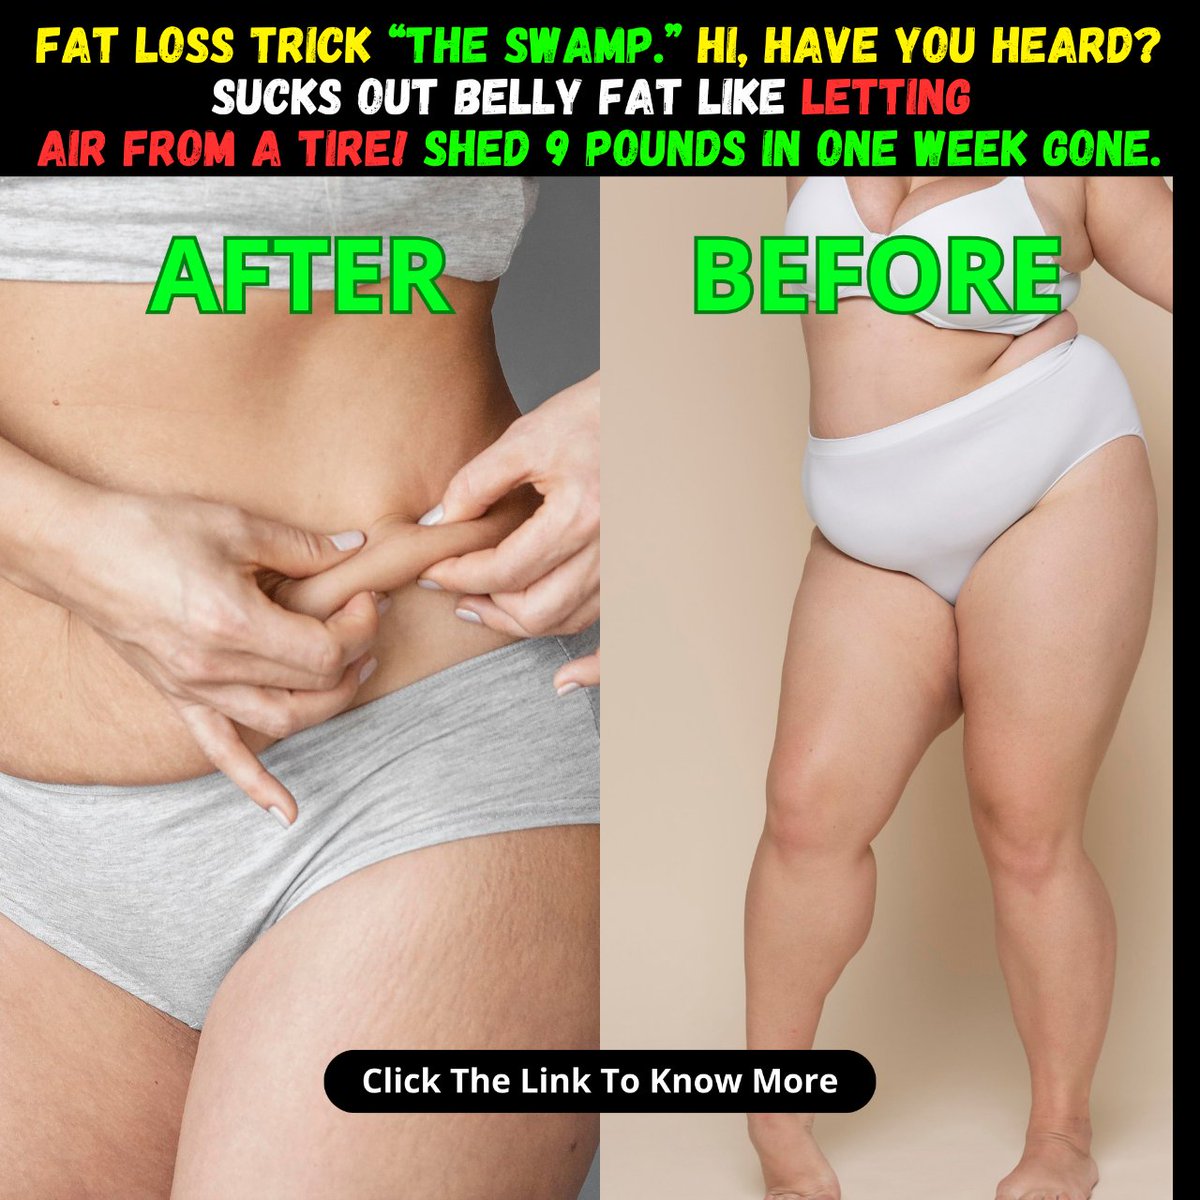 #loseweight #weightloss #burnfat #weightlosstips 
#weightlossjourney #weightlosstips #keto #health 
Learn the science-backed approach to losing weight 
and keeping it off.👇Ivy League research holds the key.
👉 i.mtr.cool/cyzmssdhbr 👈